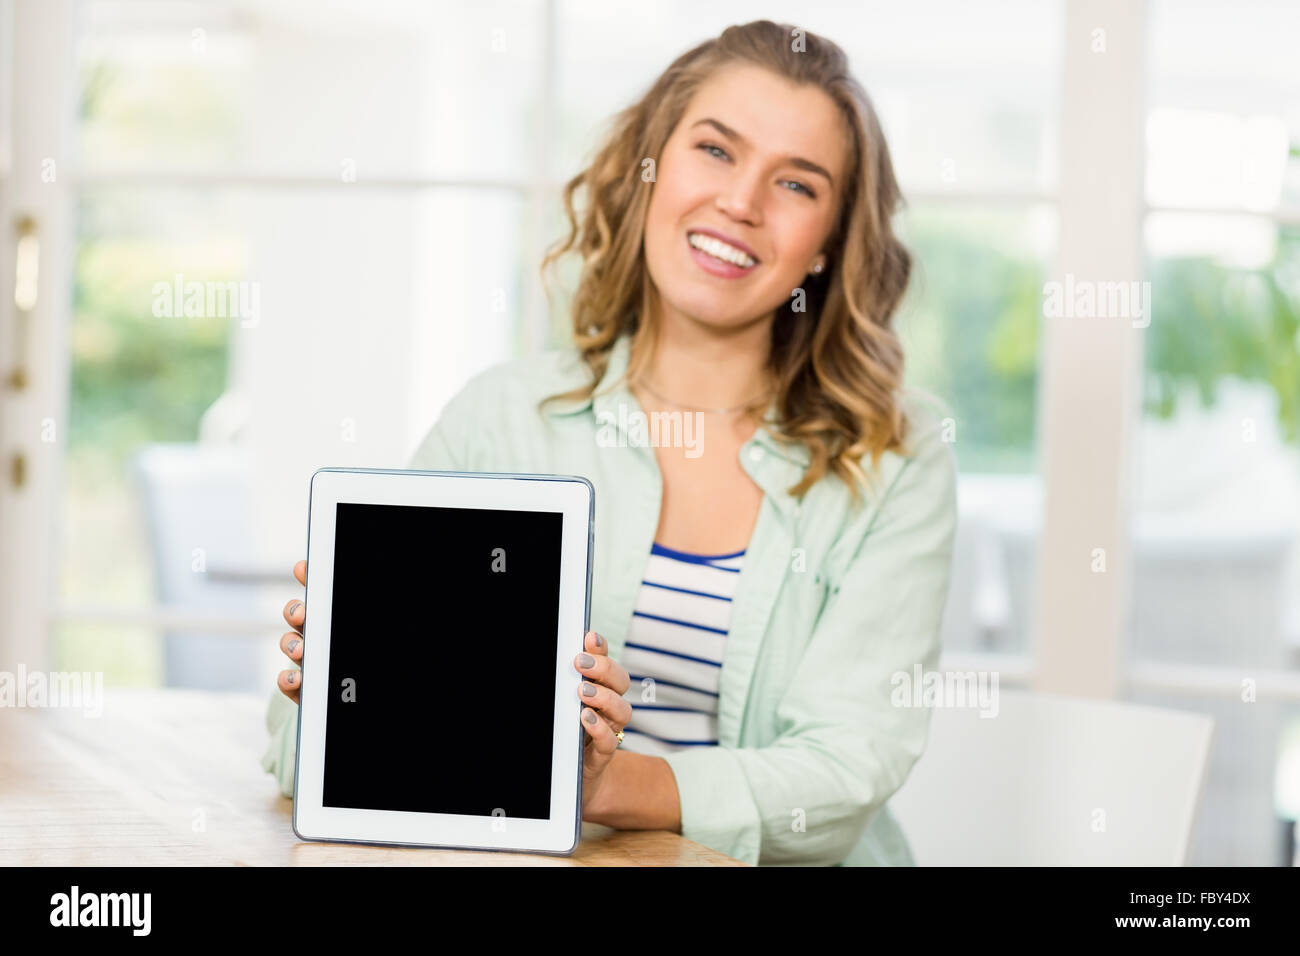 Blonde woman showing tablet screen Stock Photo